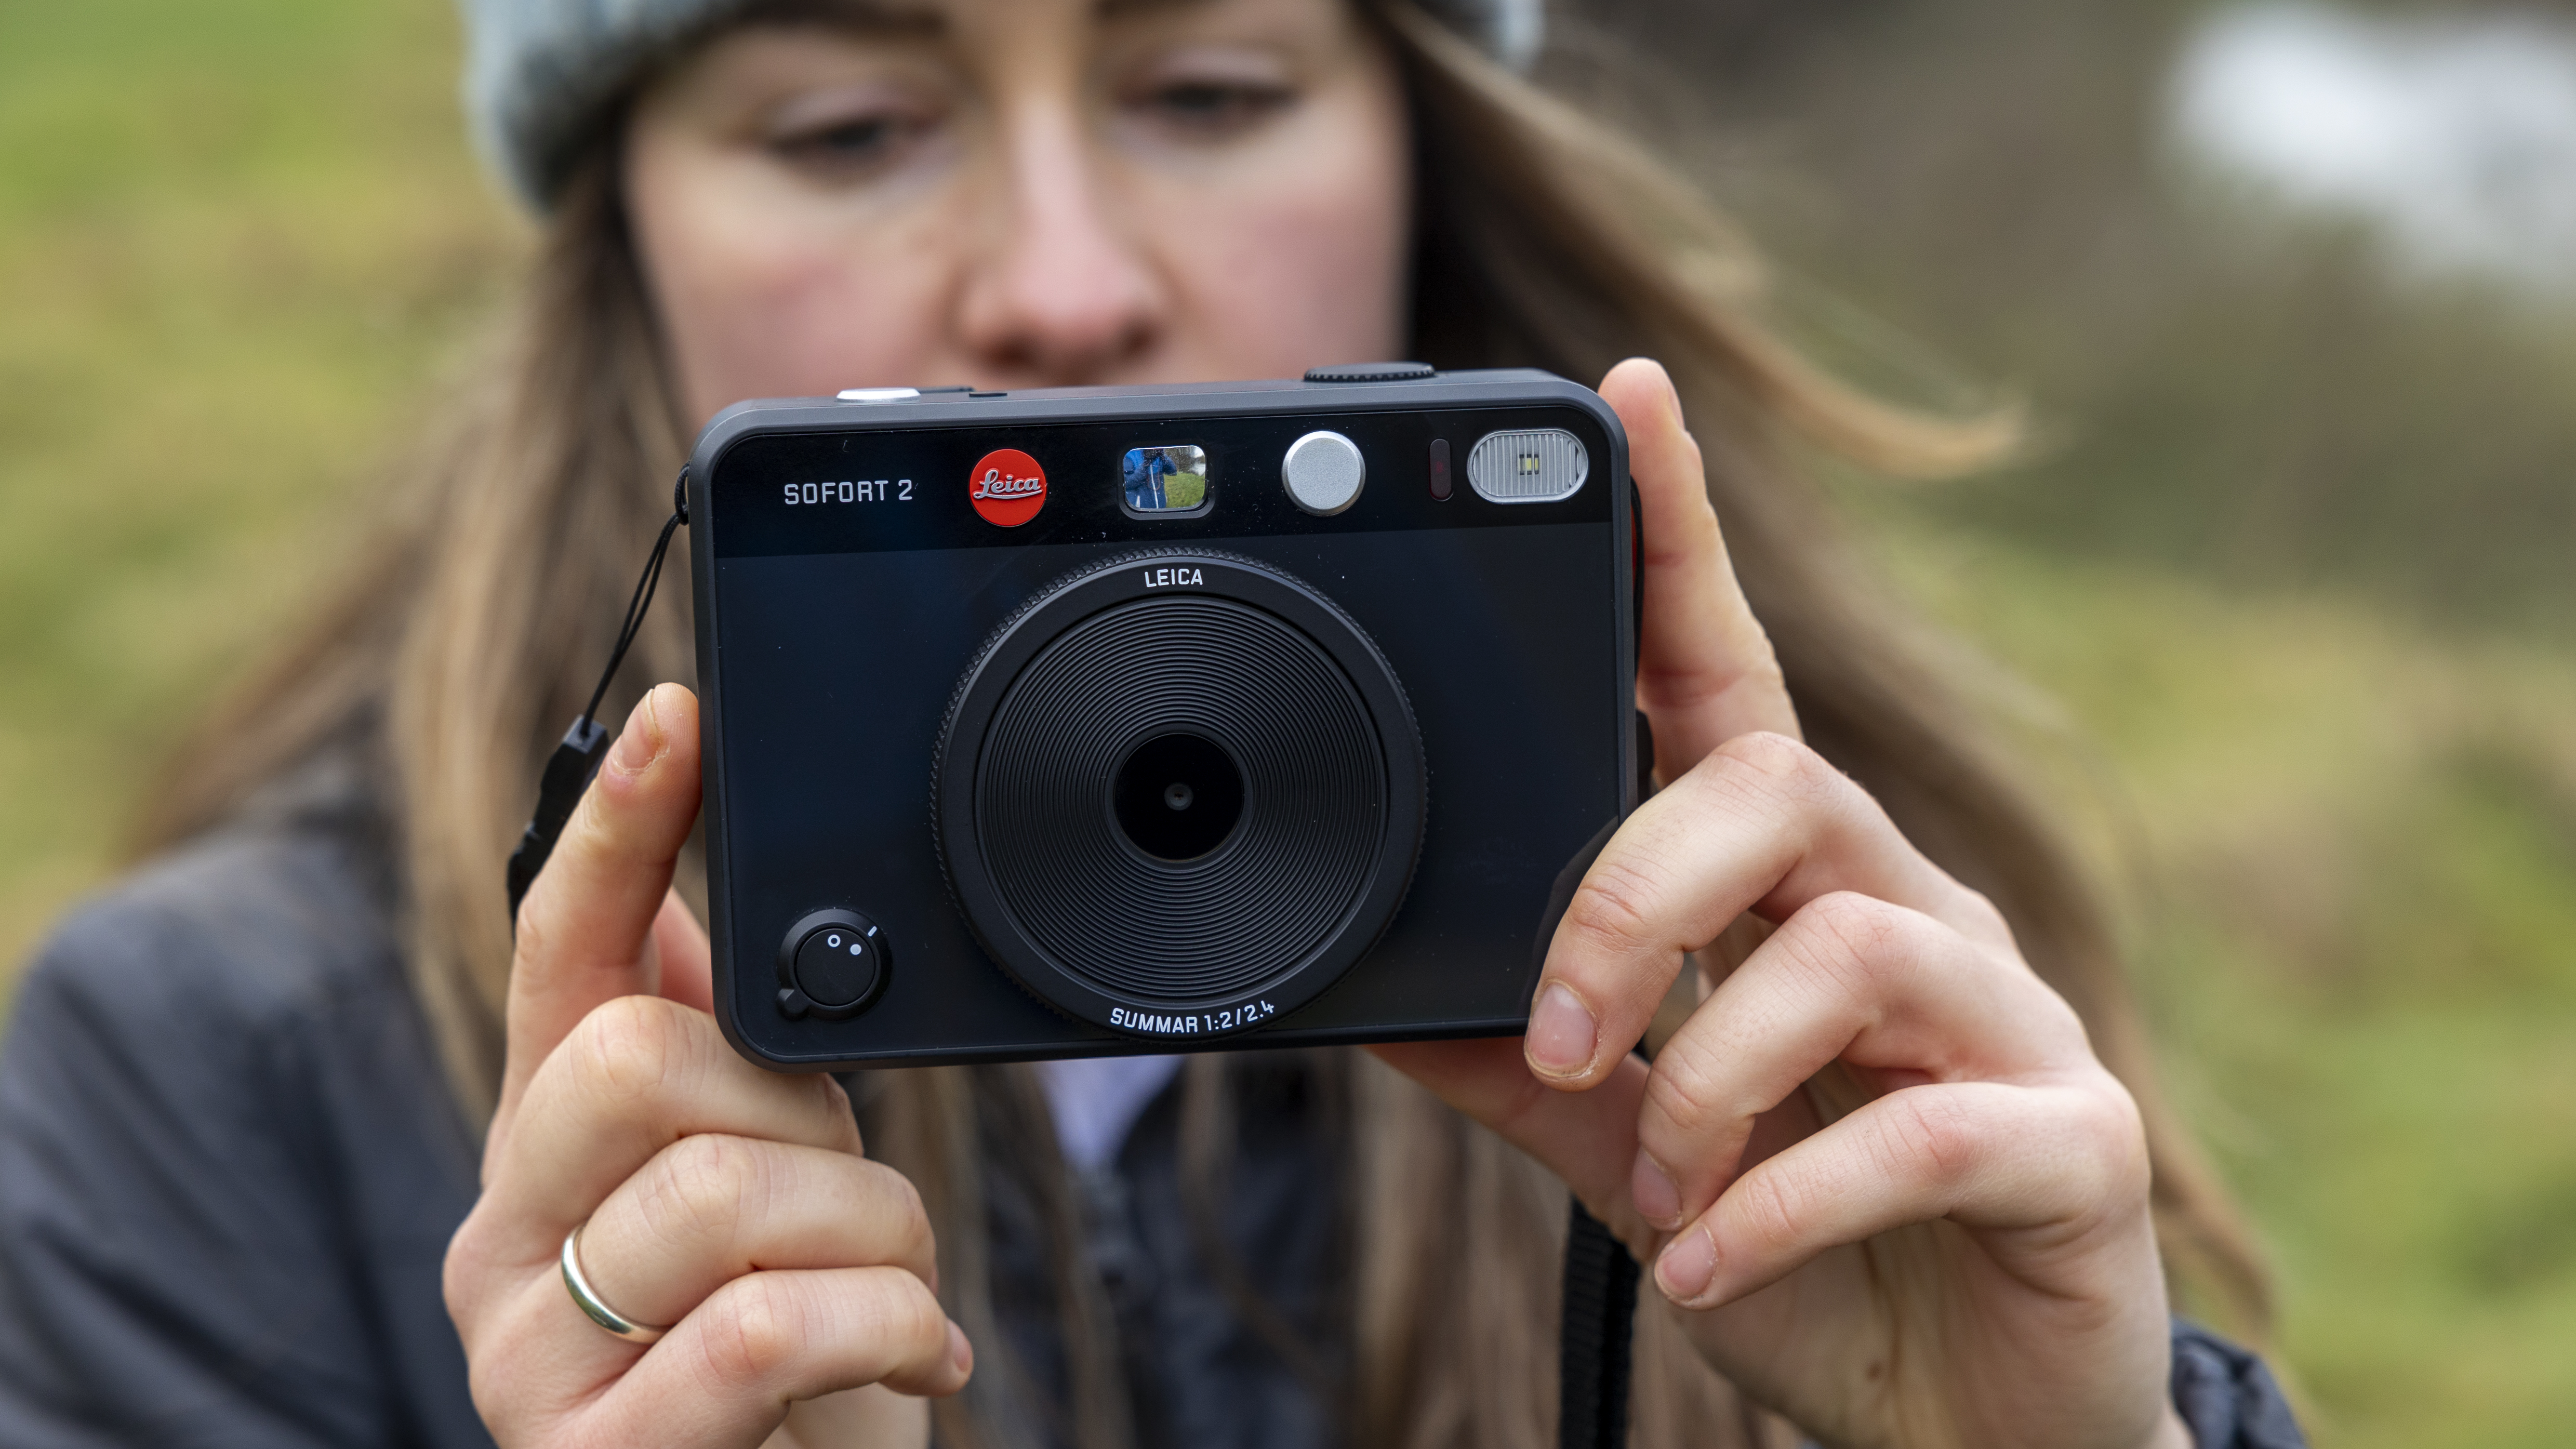 The Leica Sofort 2 being held by a woman in a field